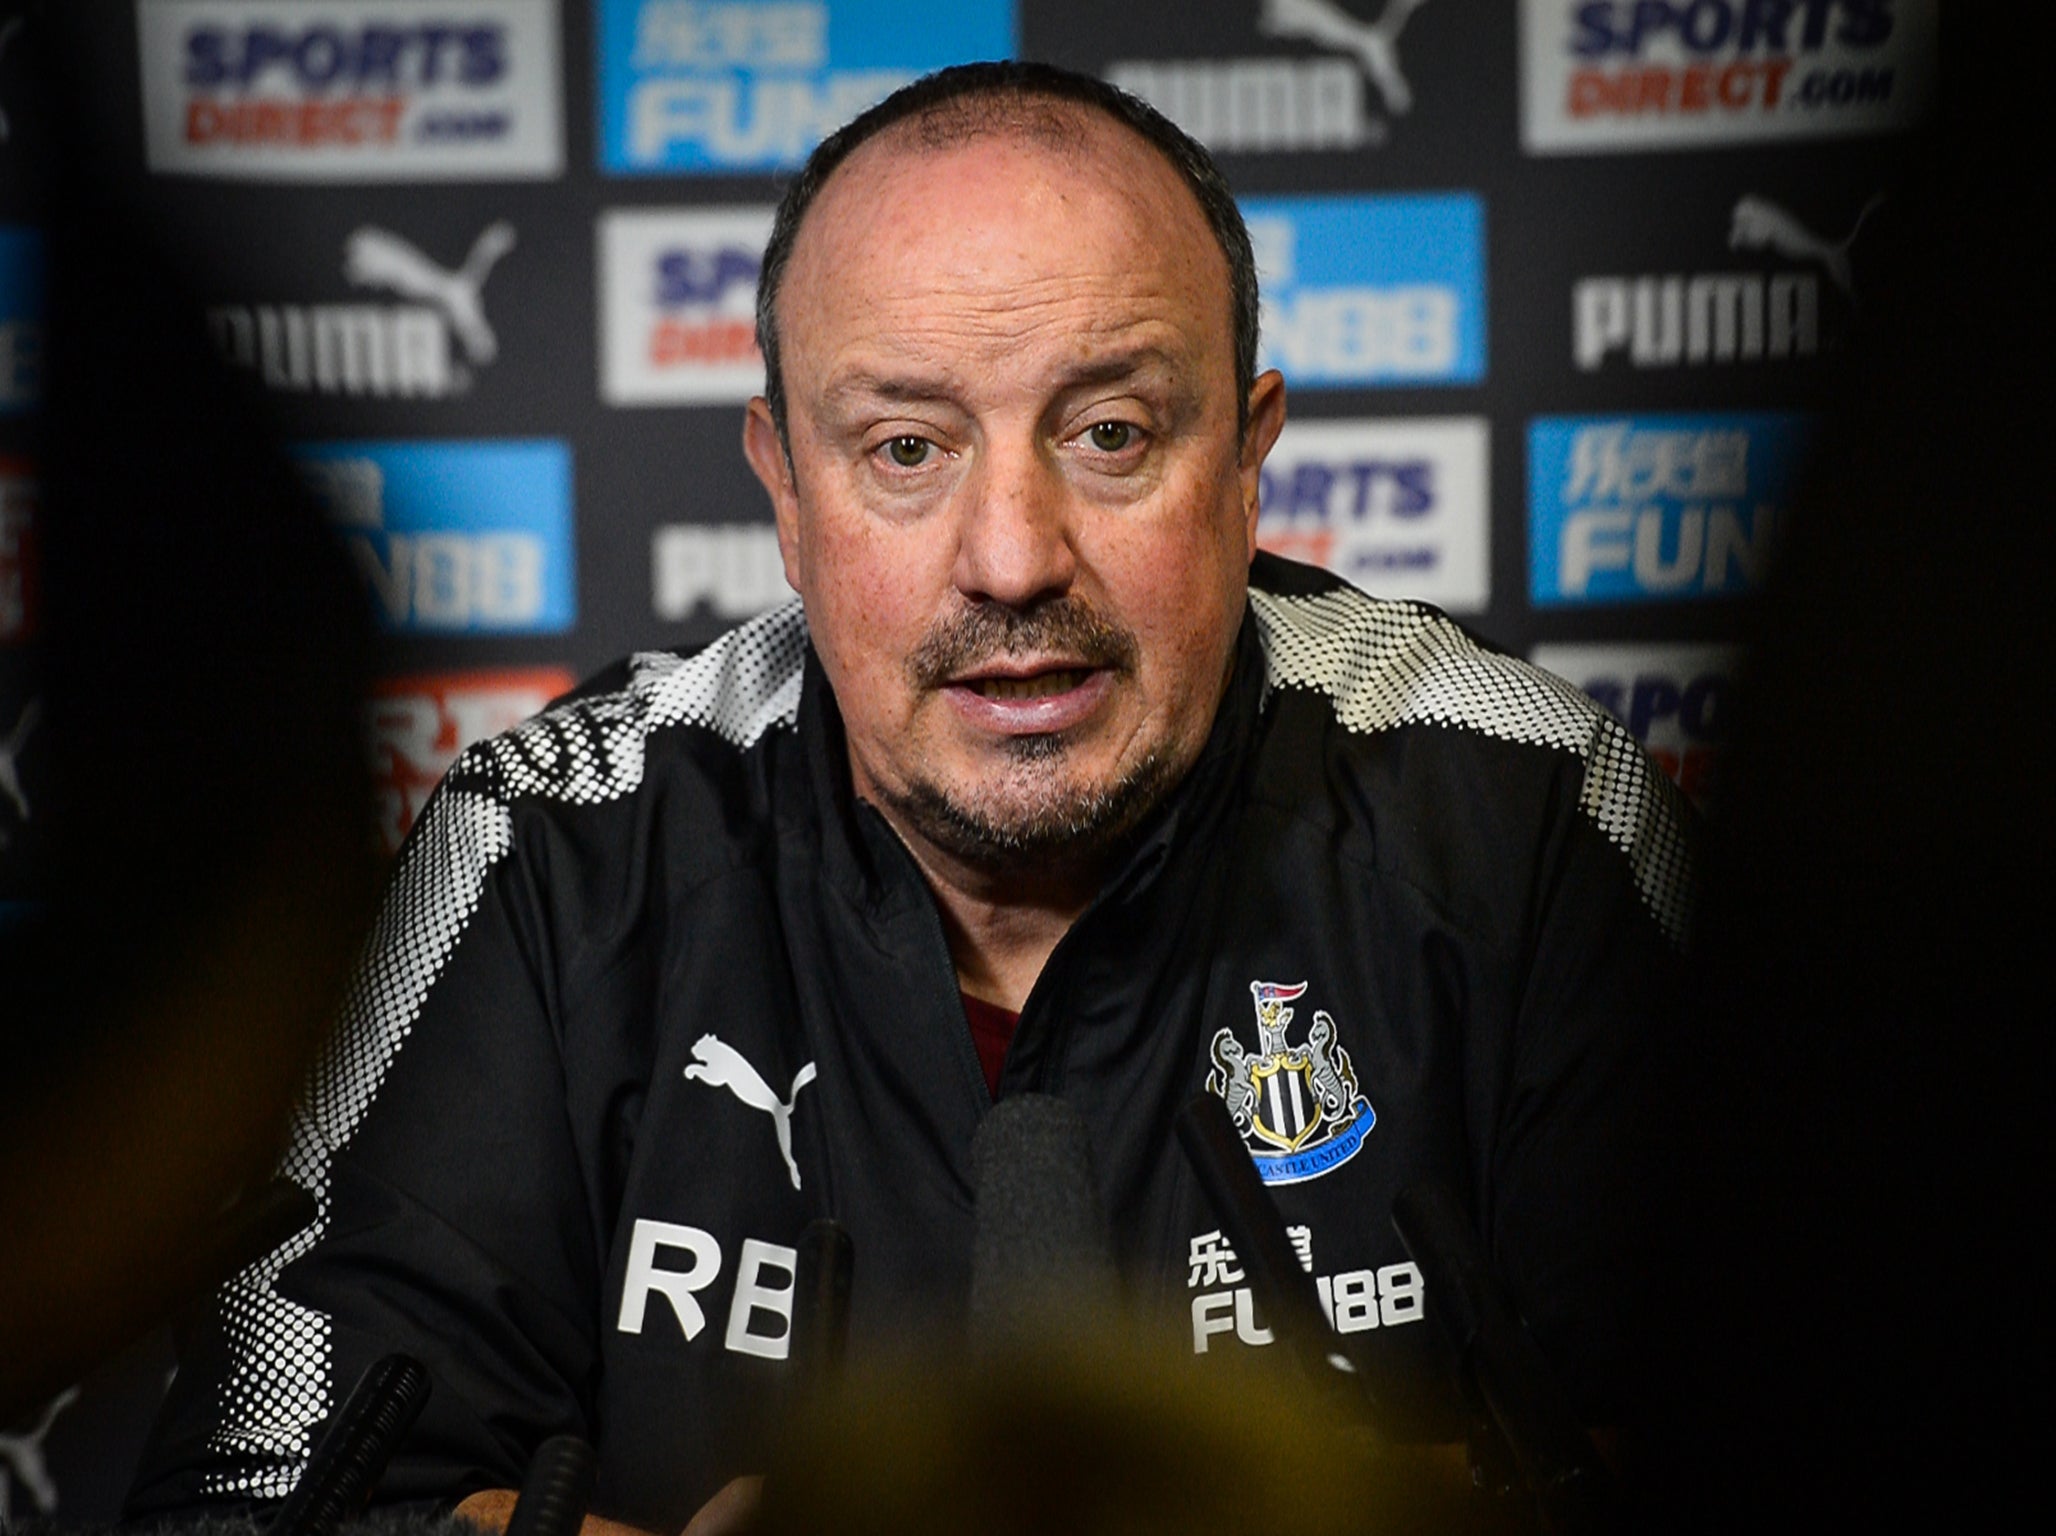 Benitez wants his team to earn 20 points by Christmas